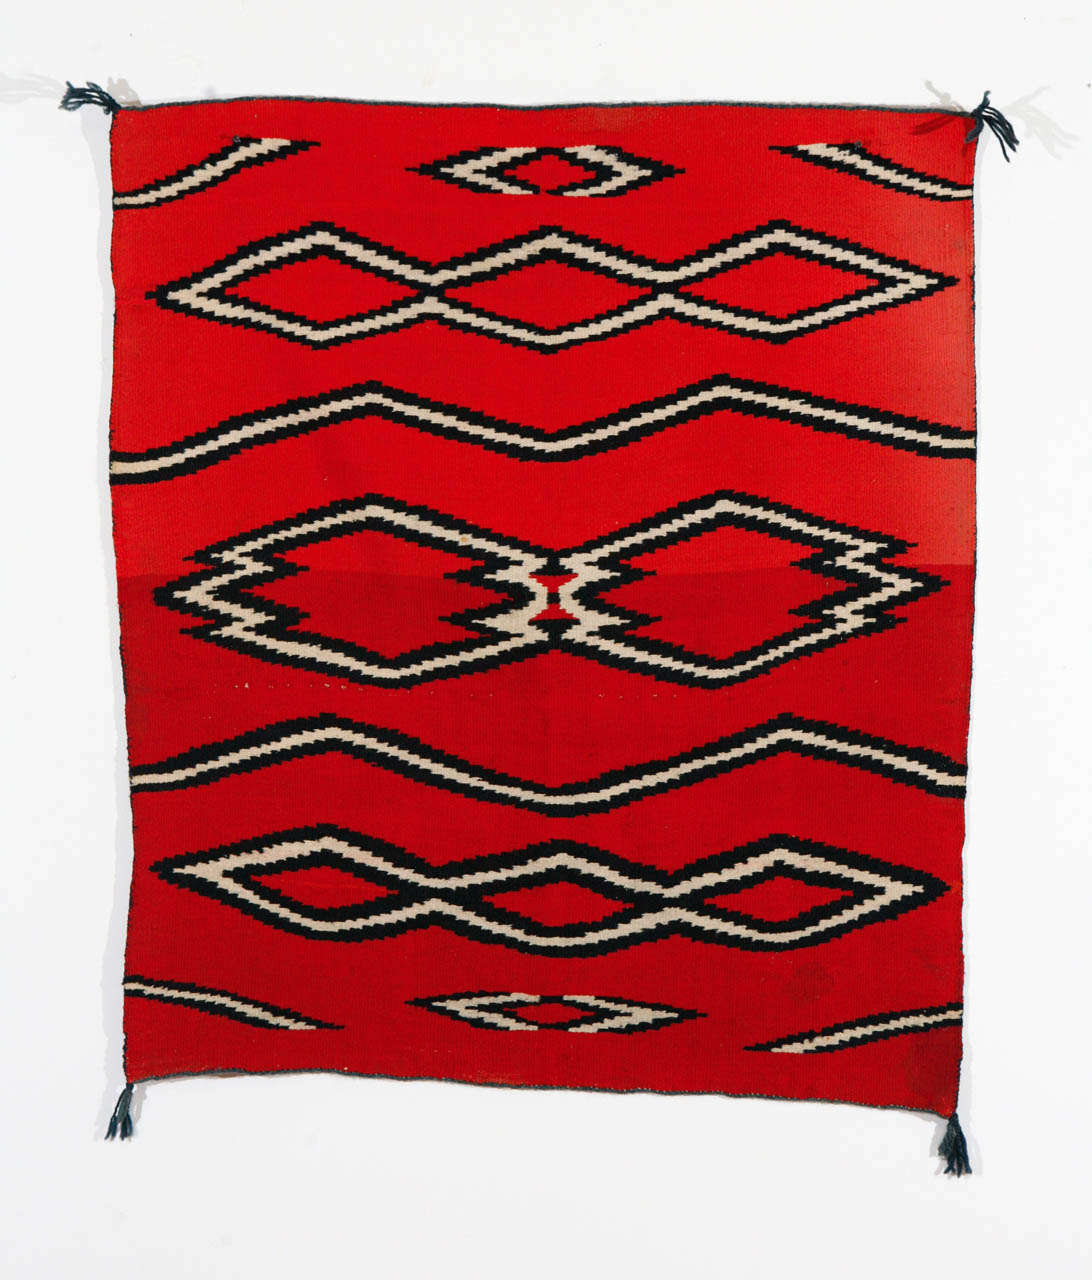 A small Navajo Child's Blanket in a serrated diamond pattern of aniline red hand spun wool, natural white hand spun, and indigo blue dyed hand spun wool.  There have been small, professional repairs by others.  The overall condition is very good. 